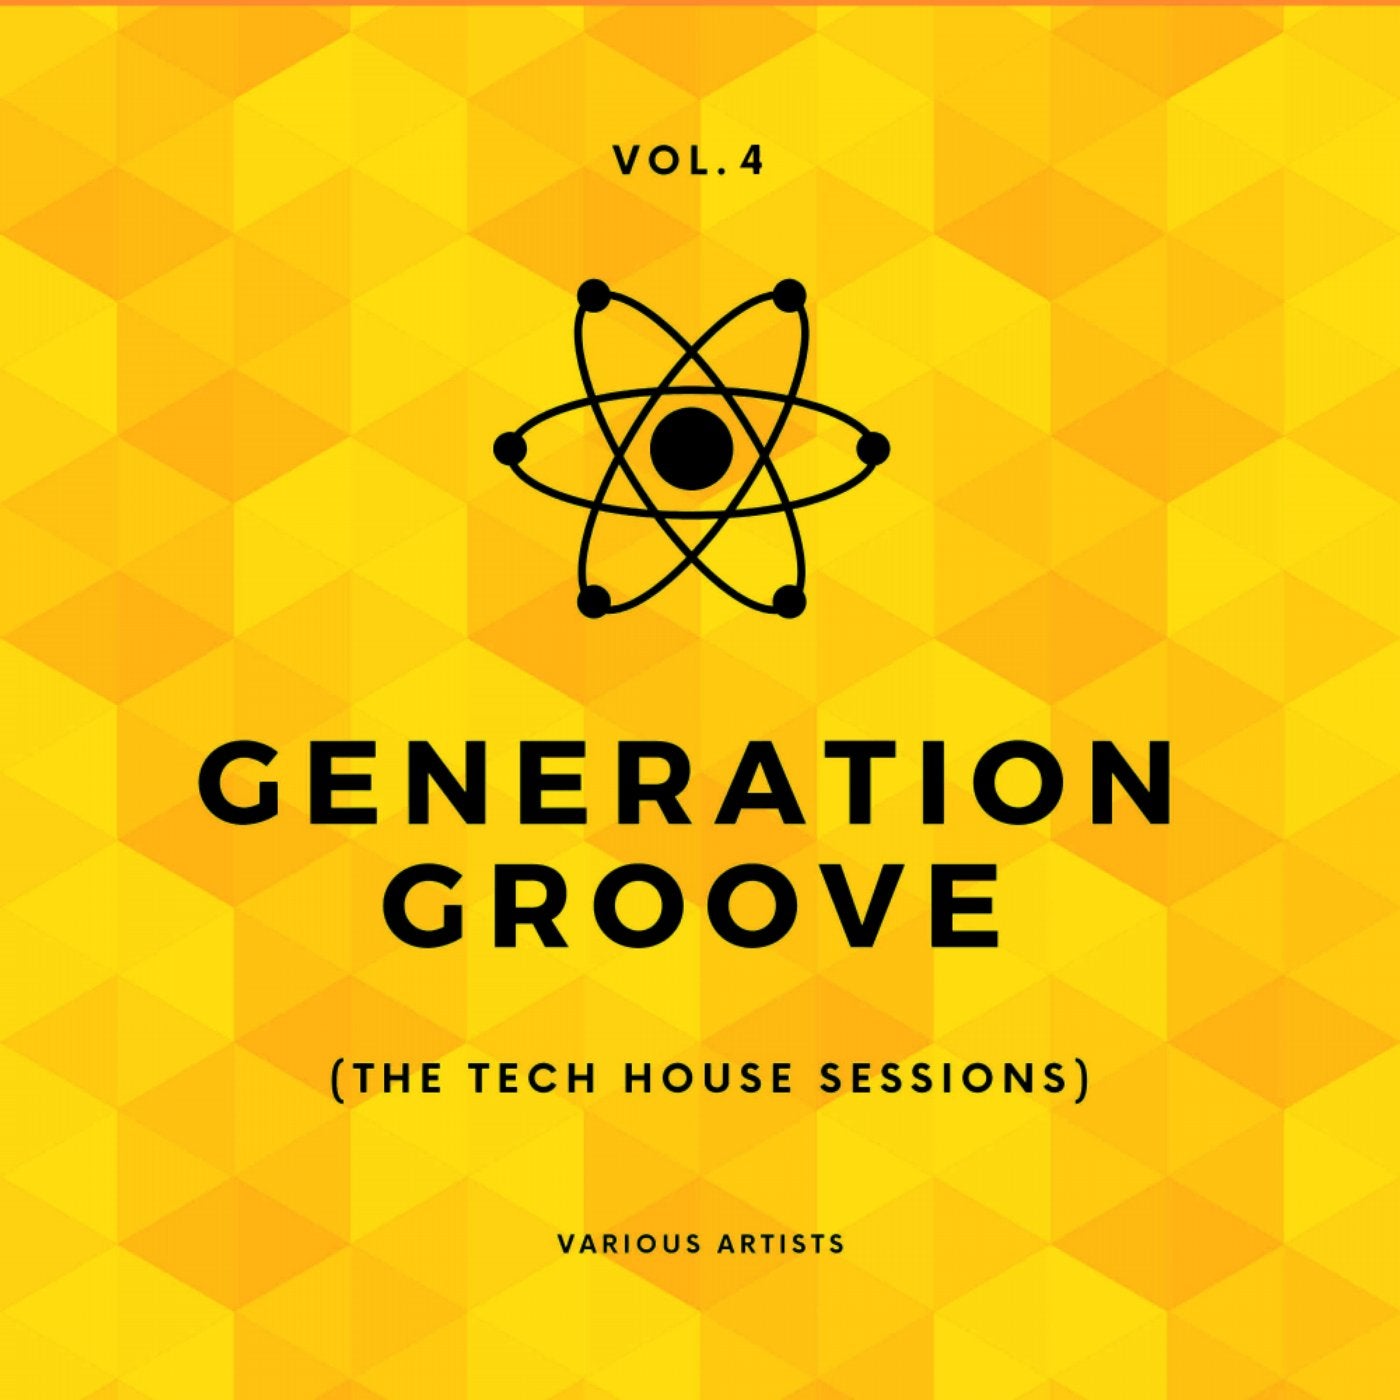 Generation Groove, Vol. 4 (The Tech House Sessions)